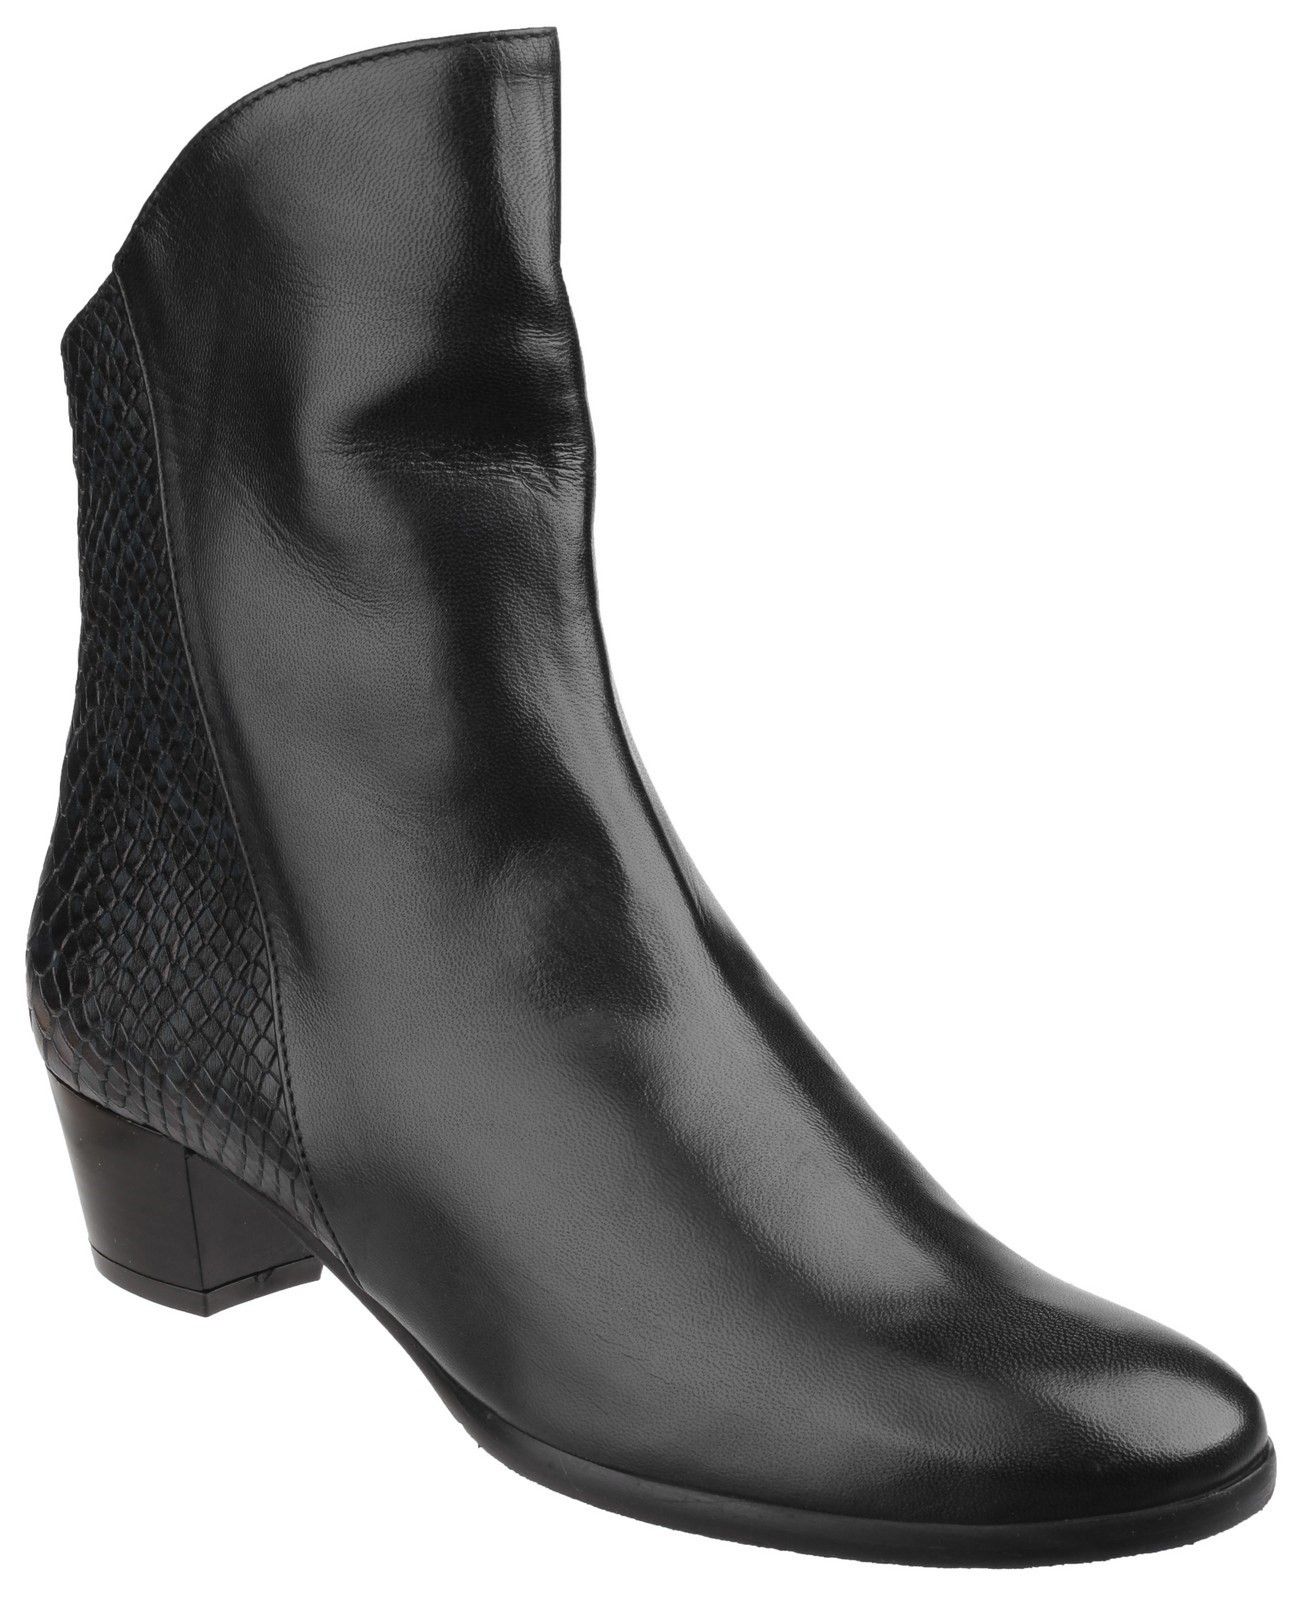 Stylish ankle boot from Riva with luxury snake print and smooth grained leather vamp. Inner side zip for quick access and tasteful snap button closure.Women's stylish ankle boot. 
Luxury snake print heel upper and smooth grained vamp. 
Inner side zip with snap button top closure. 
Comfort warm lining. 
Contoured mid-height block heel.